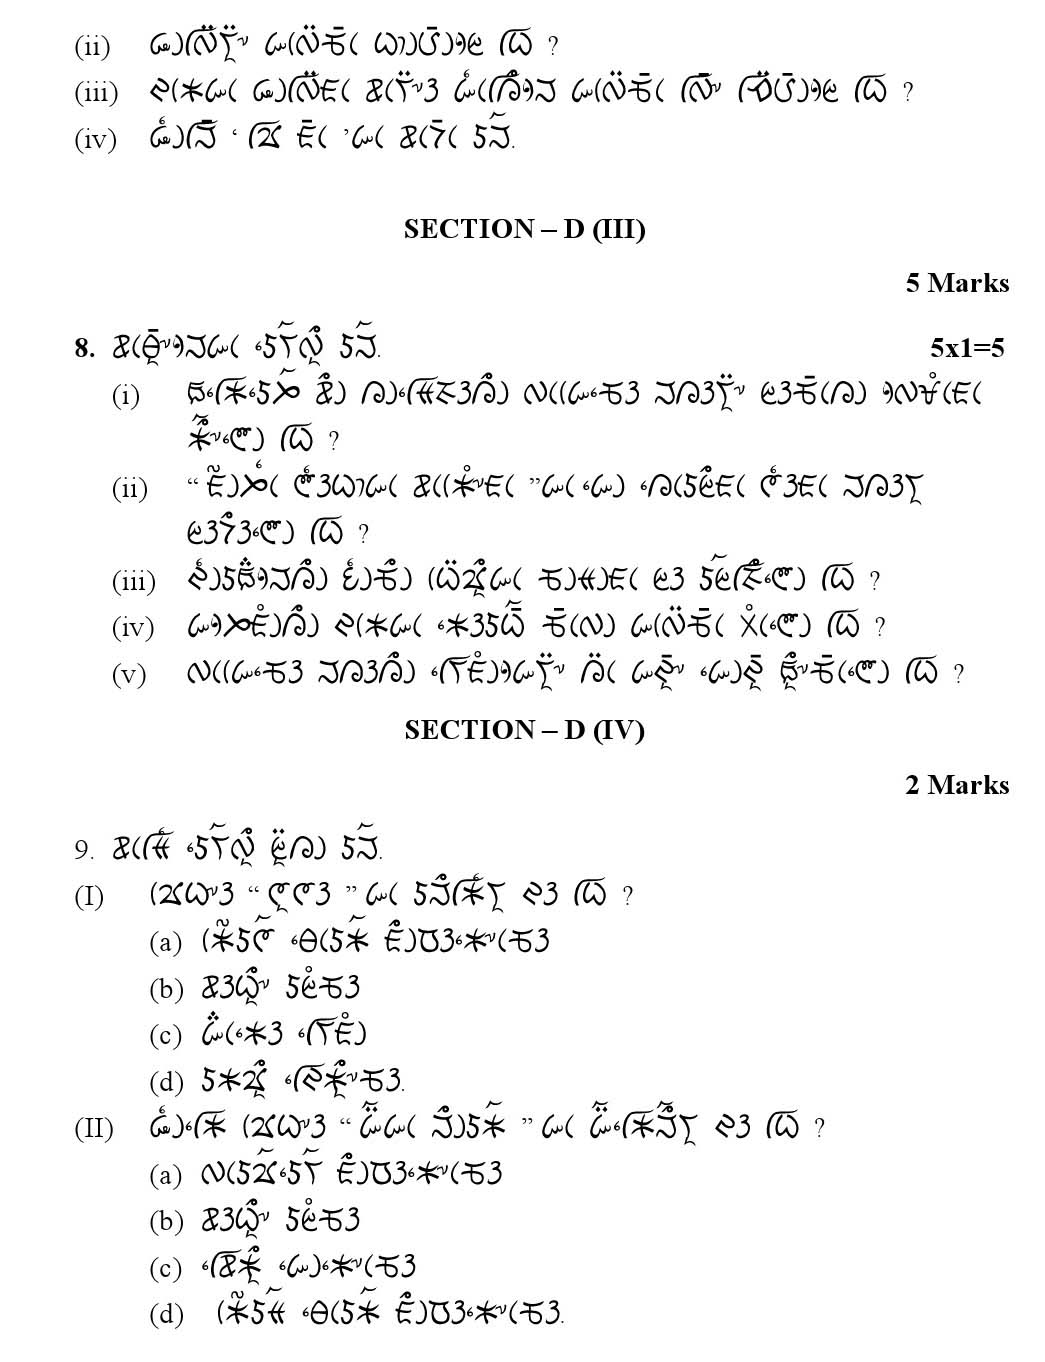 Lepcha CBSE Class X Sample Question Paper 2018-19 - Image 6